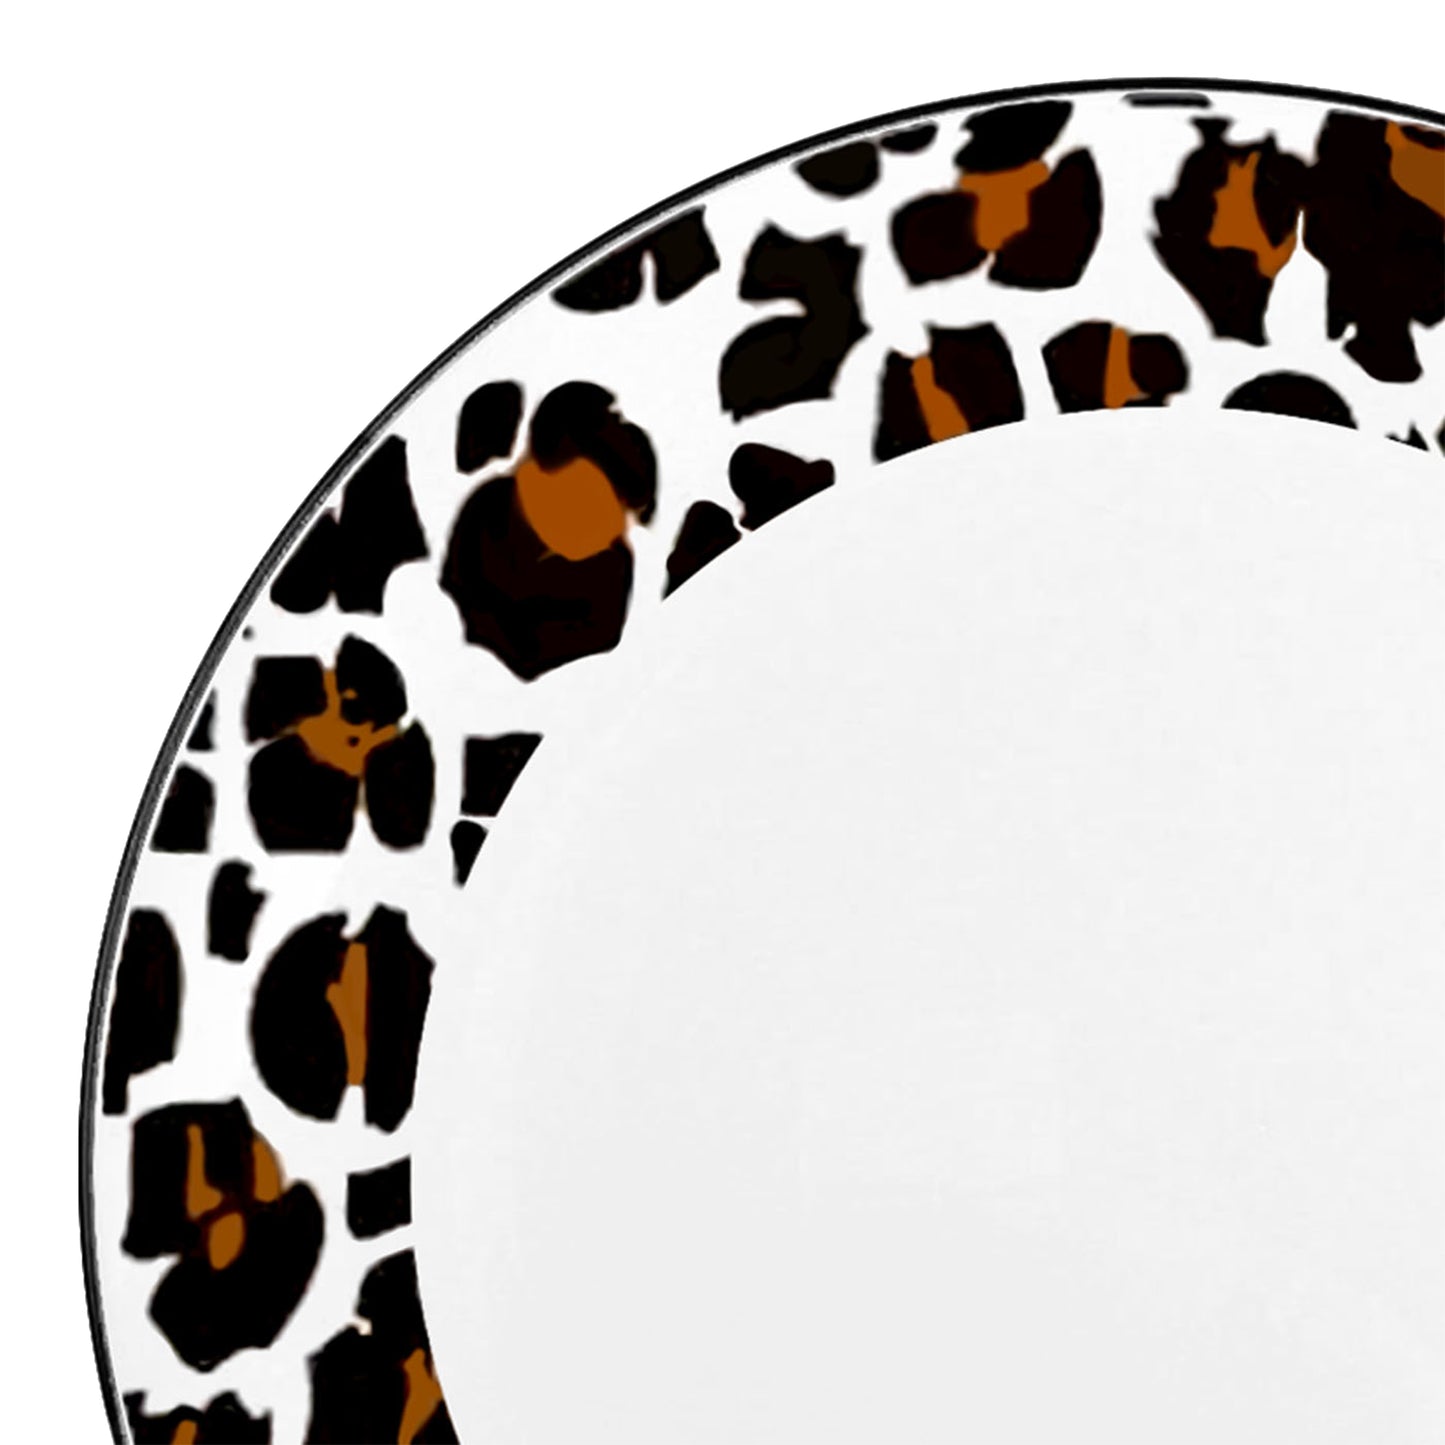 White with Black and Brown Leopard Print Rim Round Disposable Plastic Dinner Plates (10.25") | The Kaya Collection